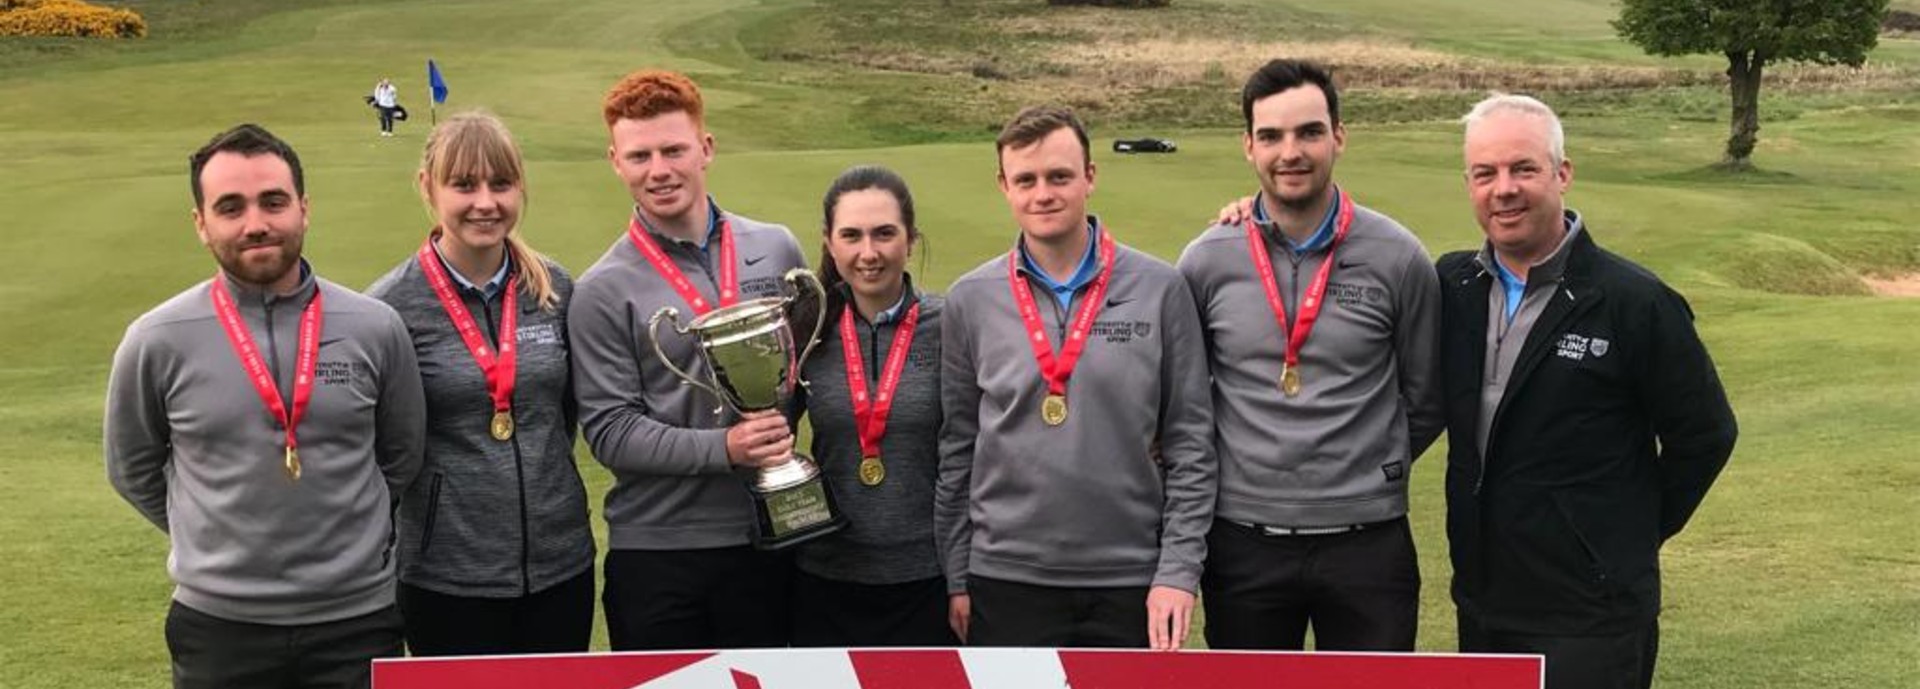 The winning University of Stirling golf team with the BUCS Championship trophy